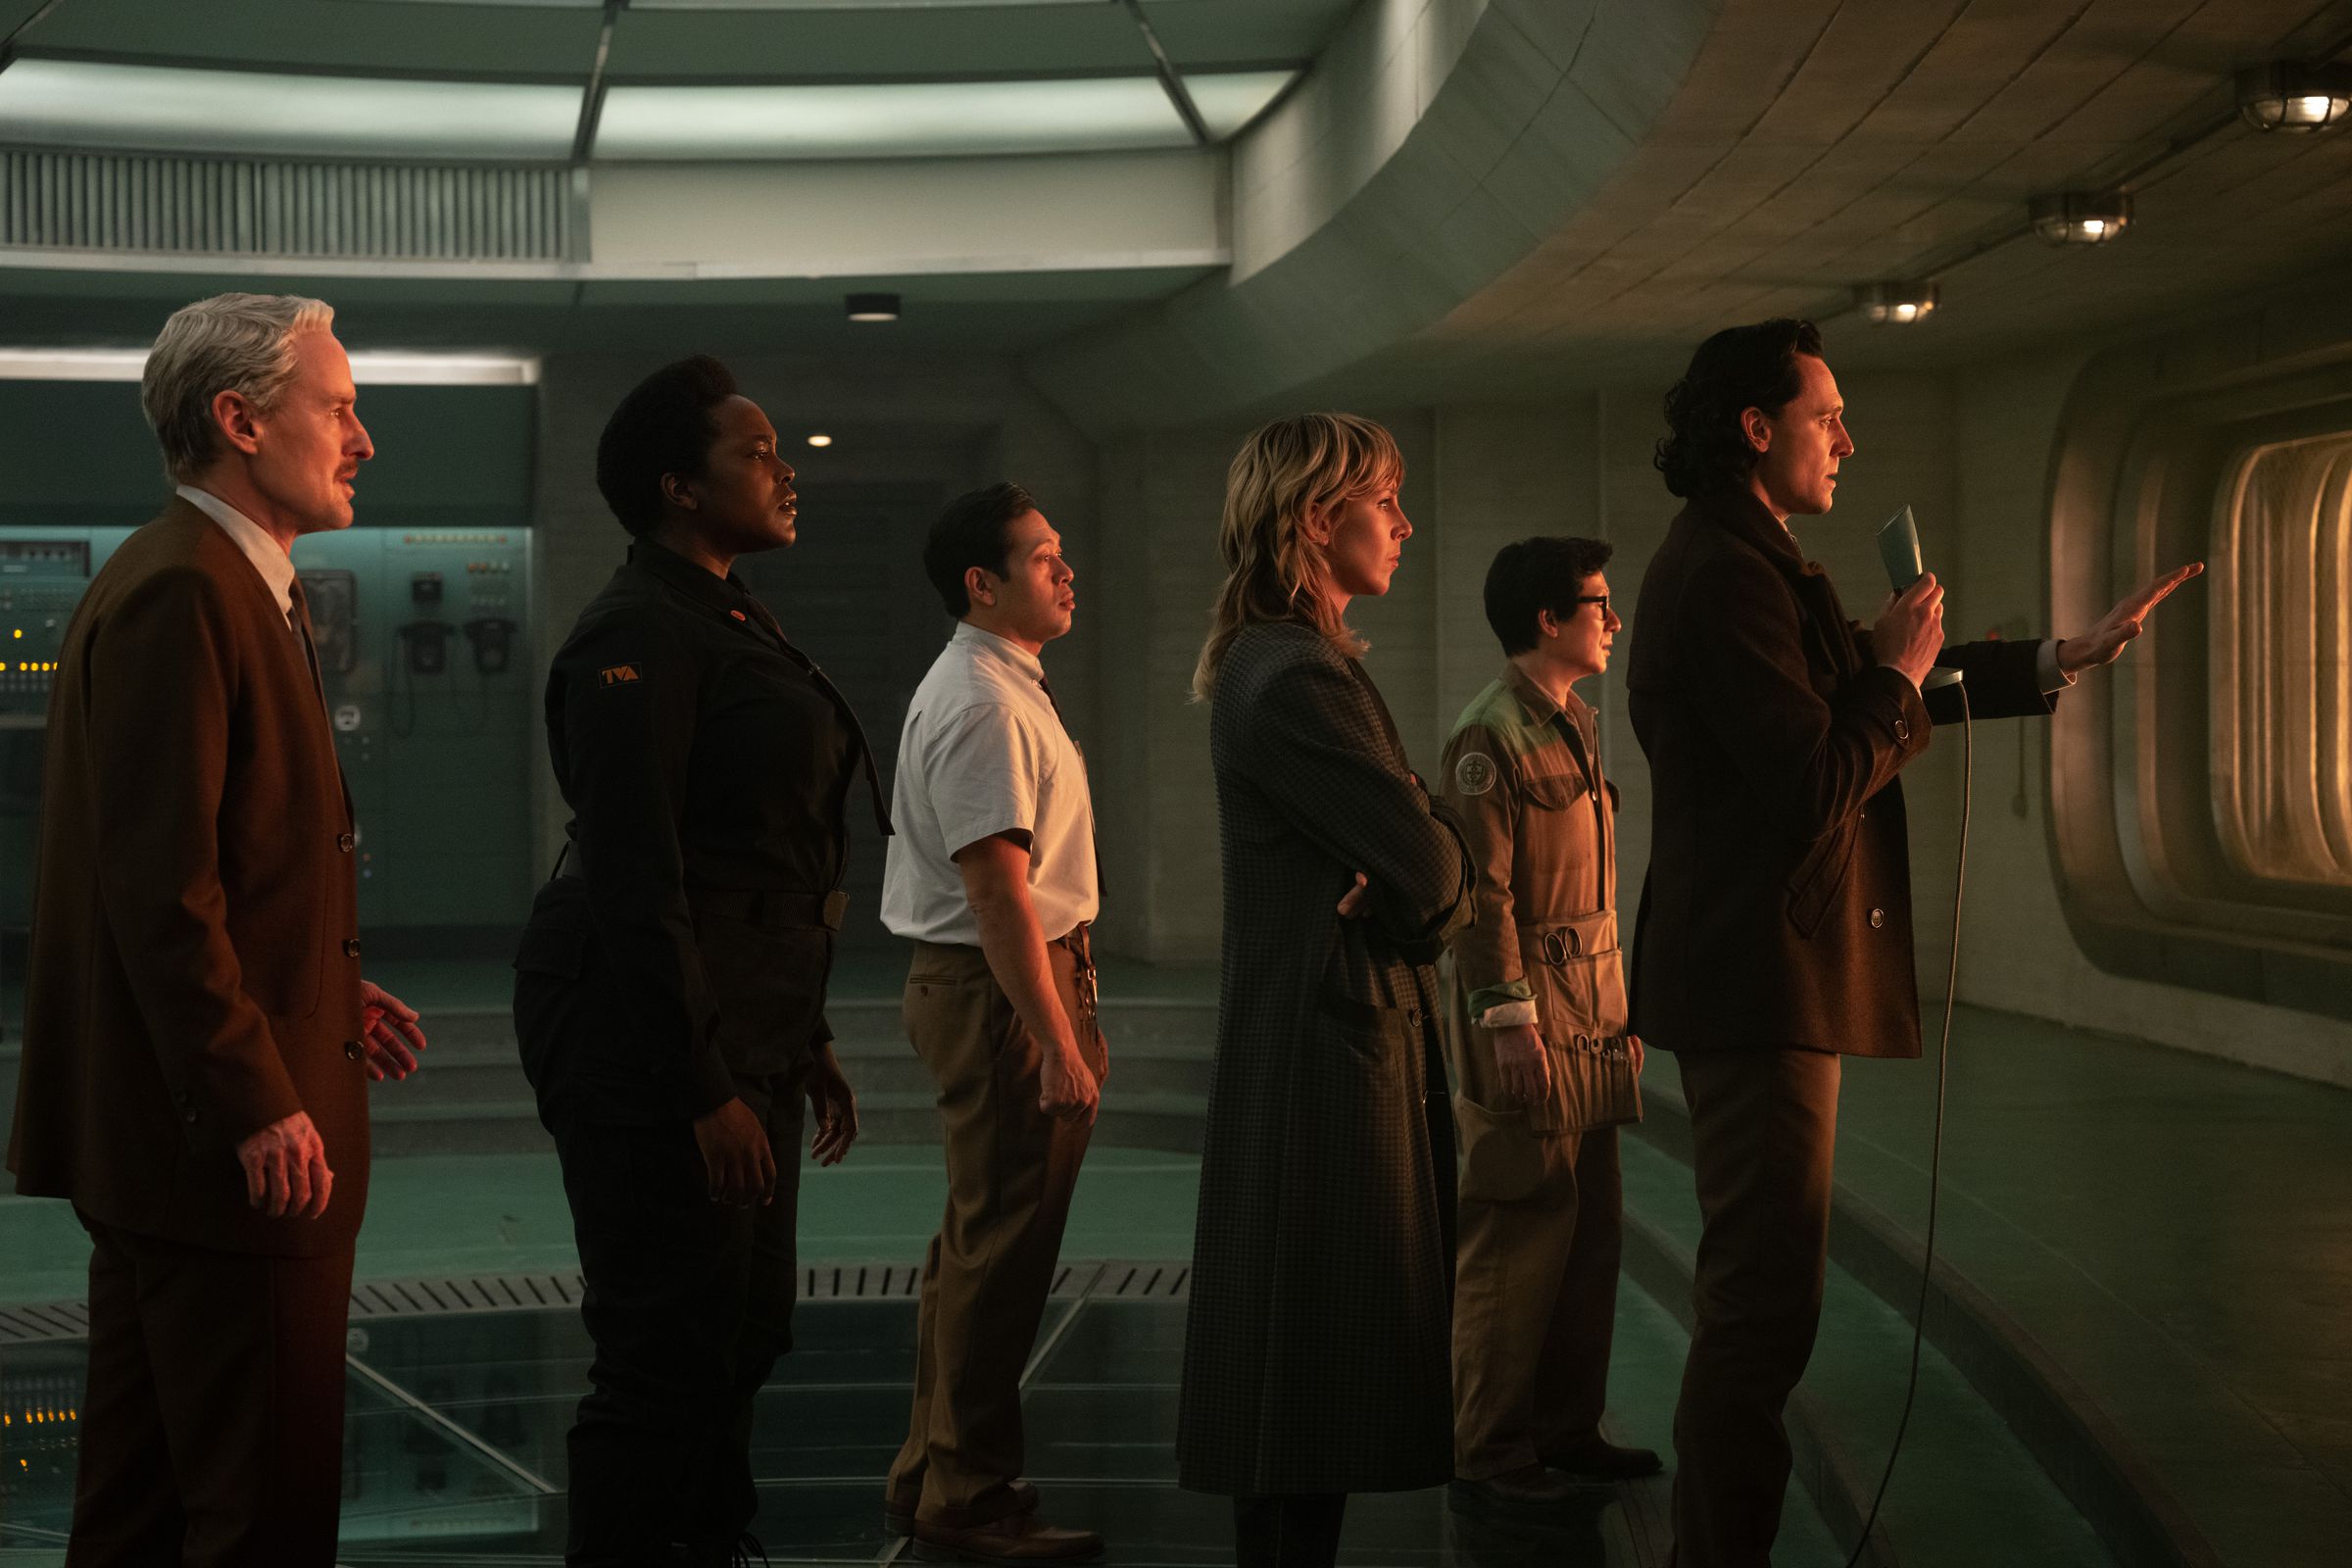 A man in a suit, a woman in a futuristic security uniform, a man in a short sleeved shirt and slacks, a woman in a long coat, a man in a gray jump suit, and a man in a tweed coat in slacks holding a microphone as they all gaze out of a large window in what looks like a space ship.